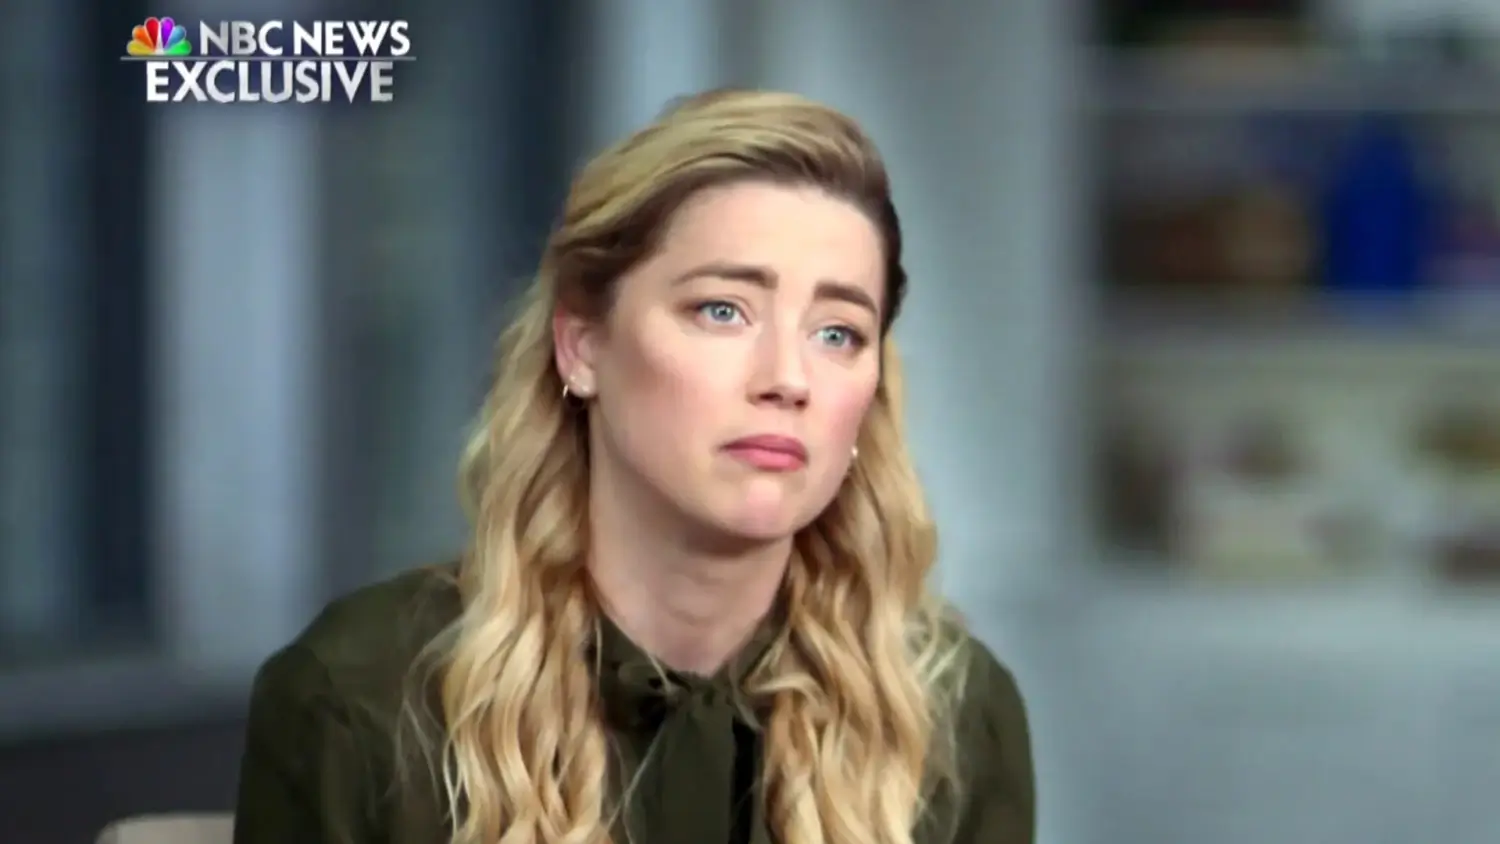 Amber Heard during her NBC interview